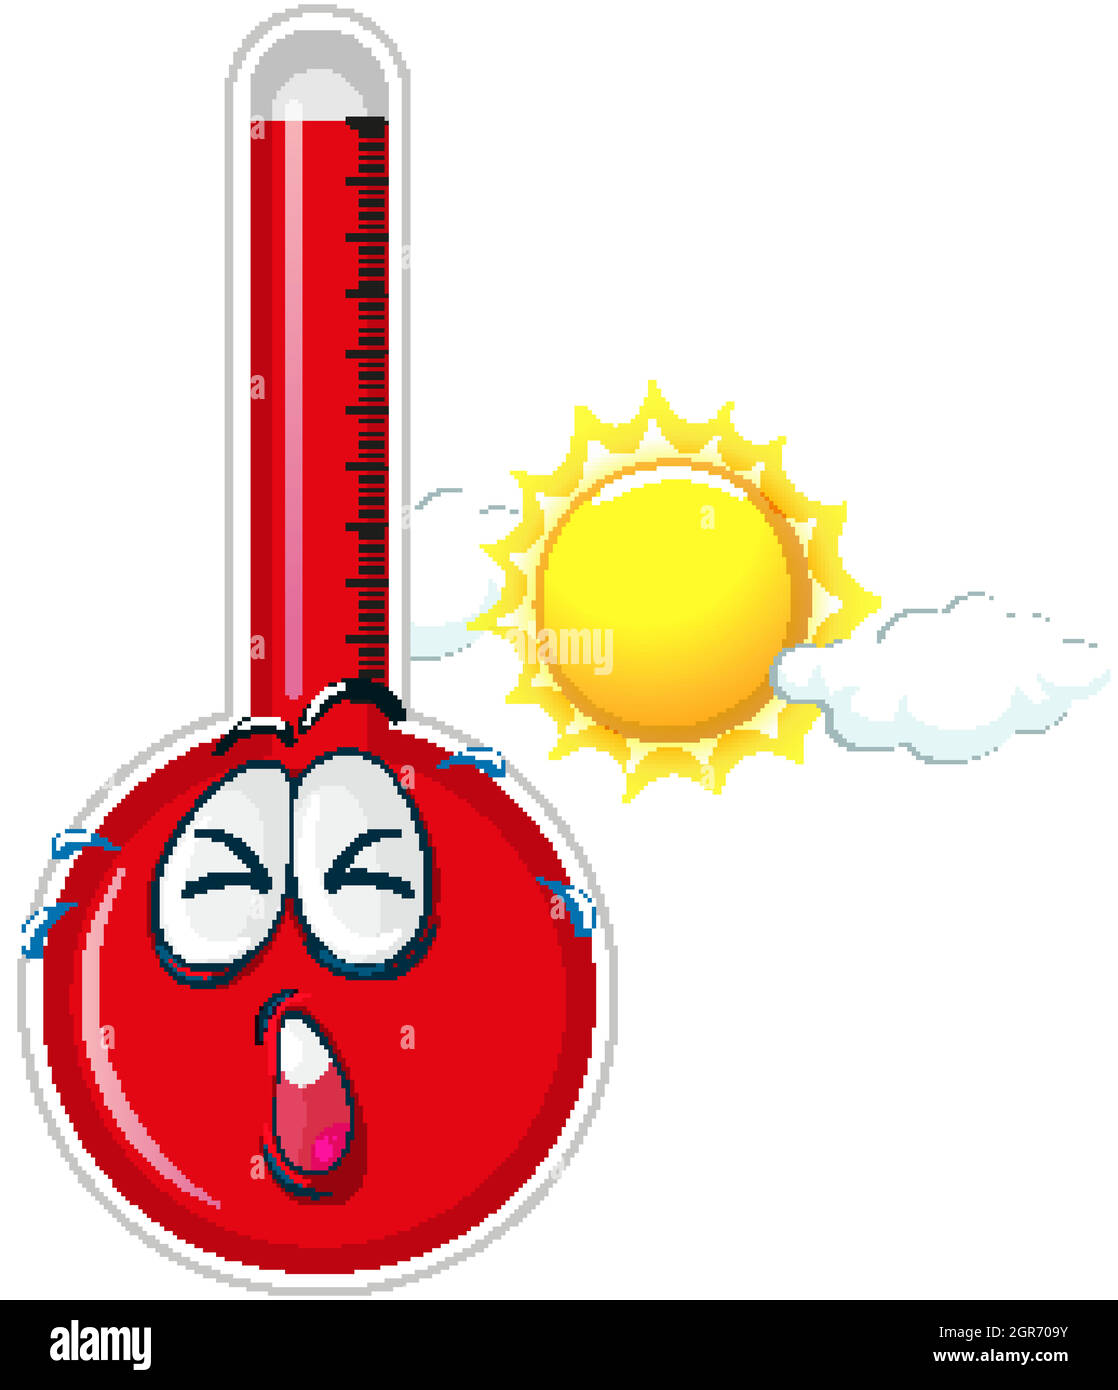 https://c8.alamy.com/comp/2GR709Y/thermometer-in-hot-weather-2GR709Y.jpg